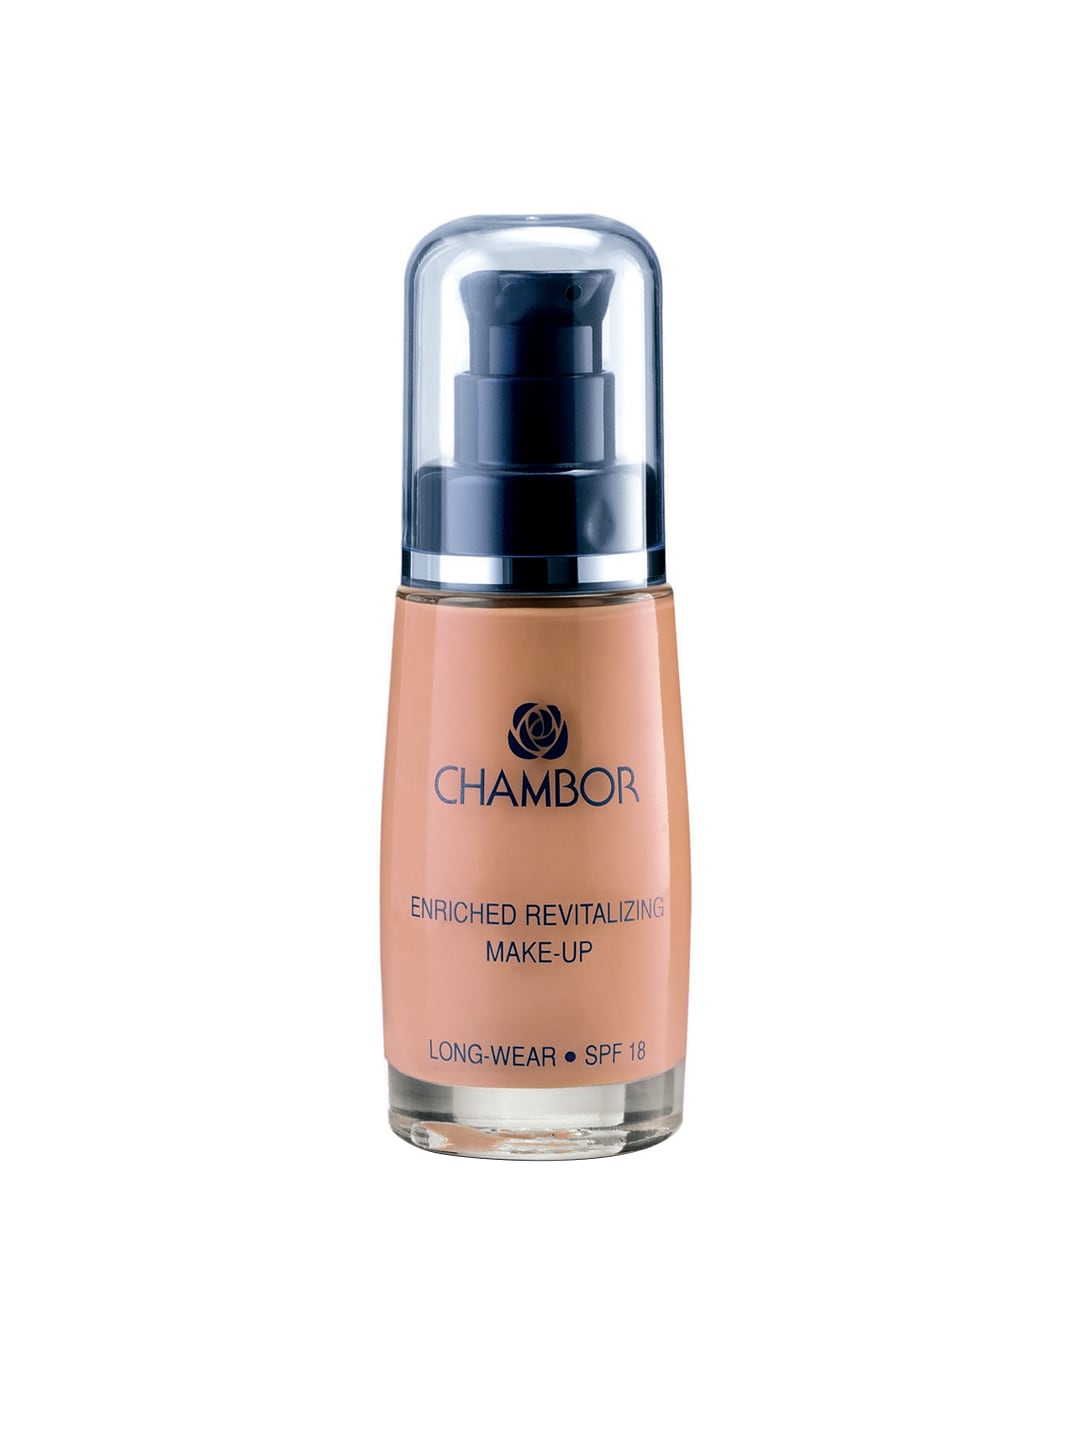 Chambor Enriched Revitalizing Make Up Foundation - Vanilla 300 30ml Price in India